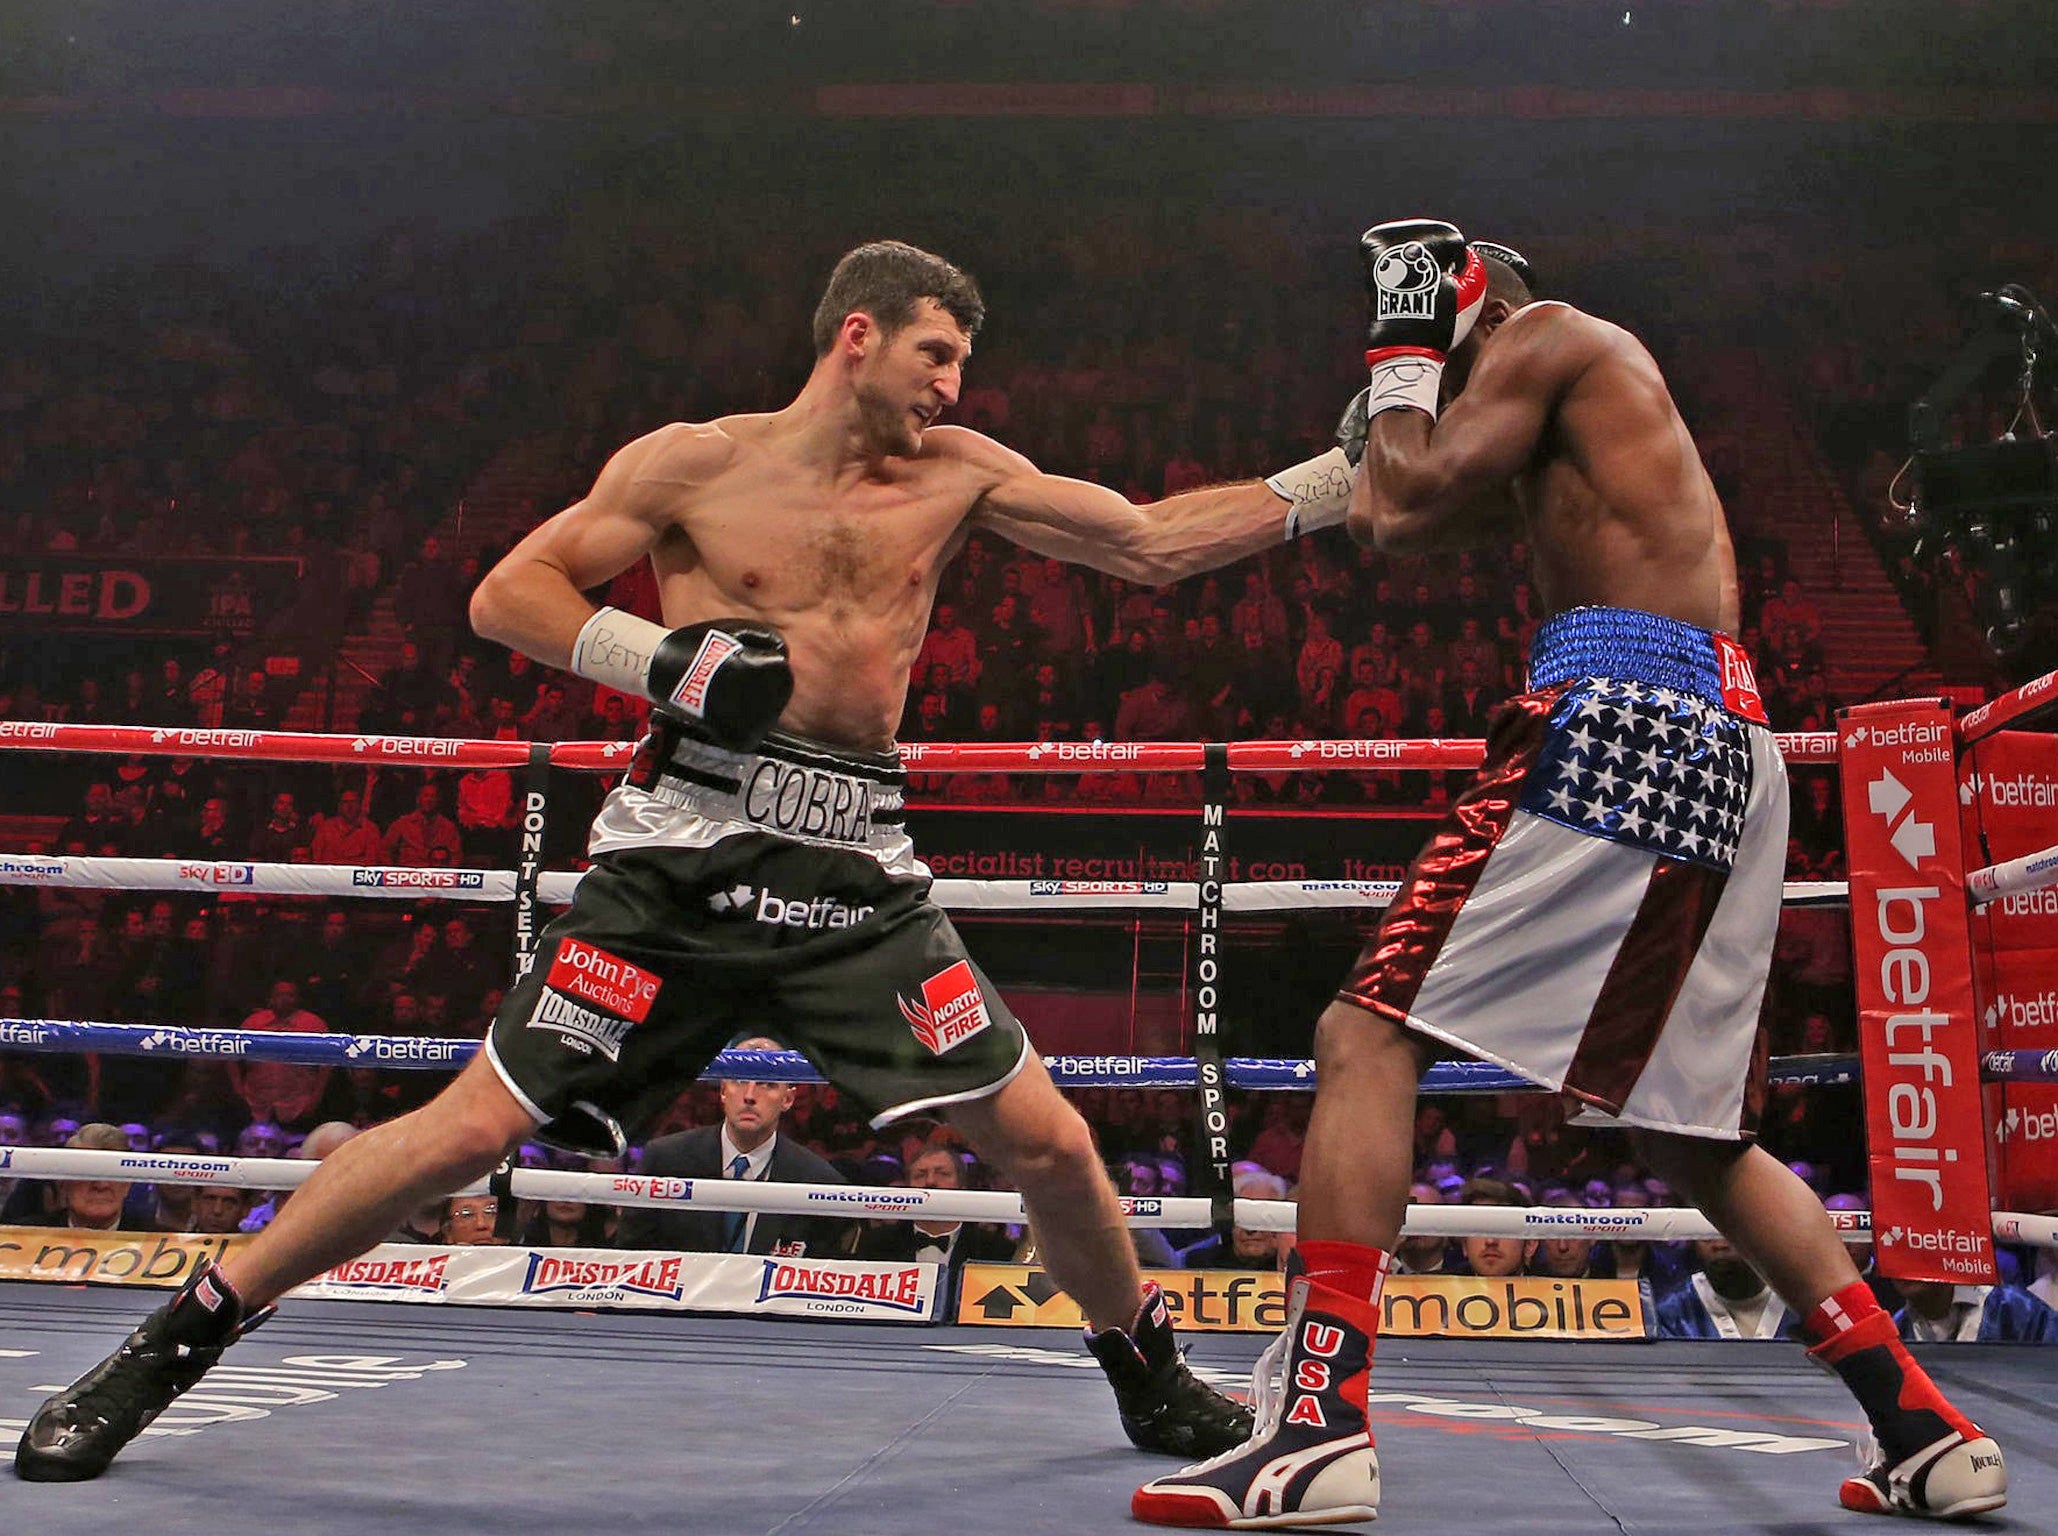 Carl Froch (left) in action against Yusaf Mack during the IBF World Super Middleweight Title fight